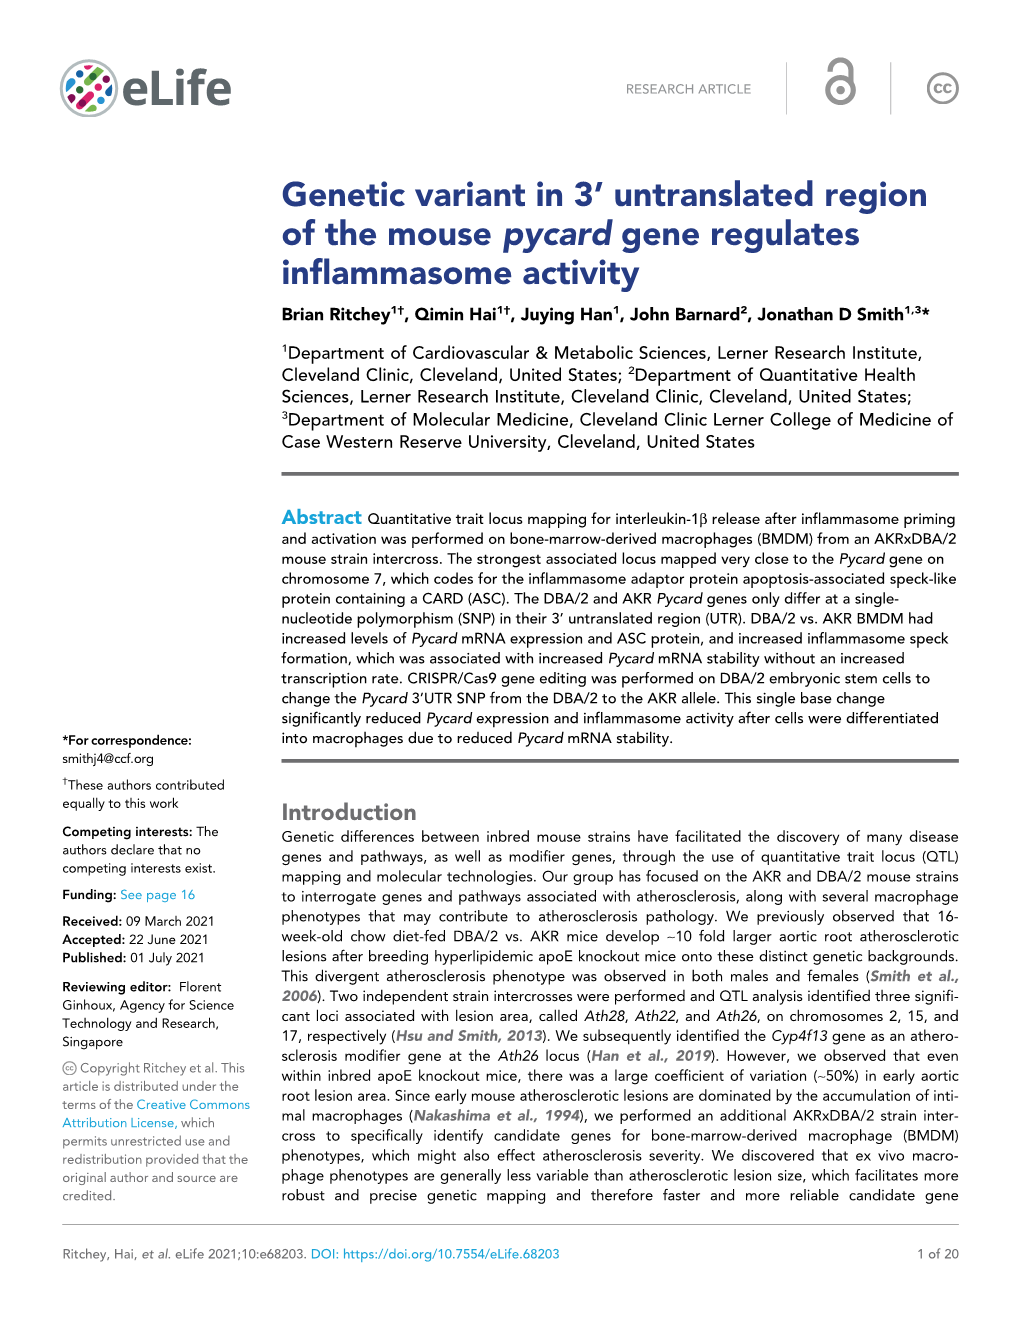 Genetic Variant in 3' Untranslated Region of the Mouse Pycard Gene